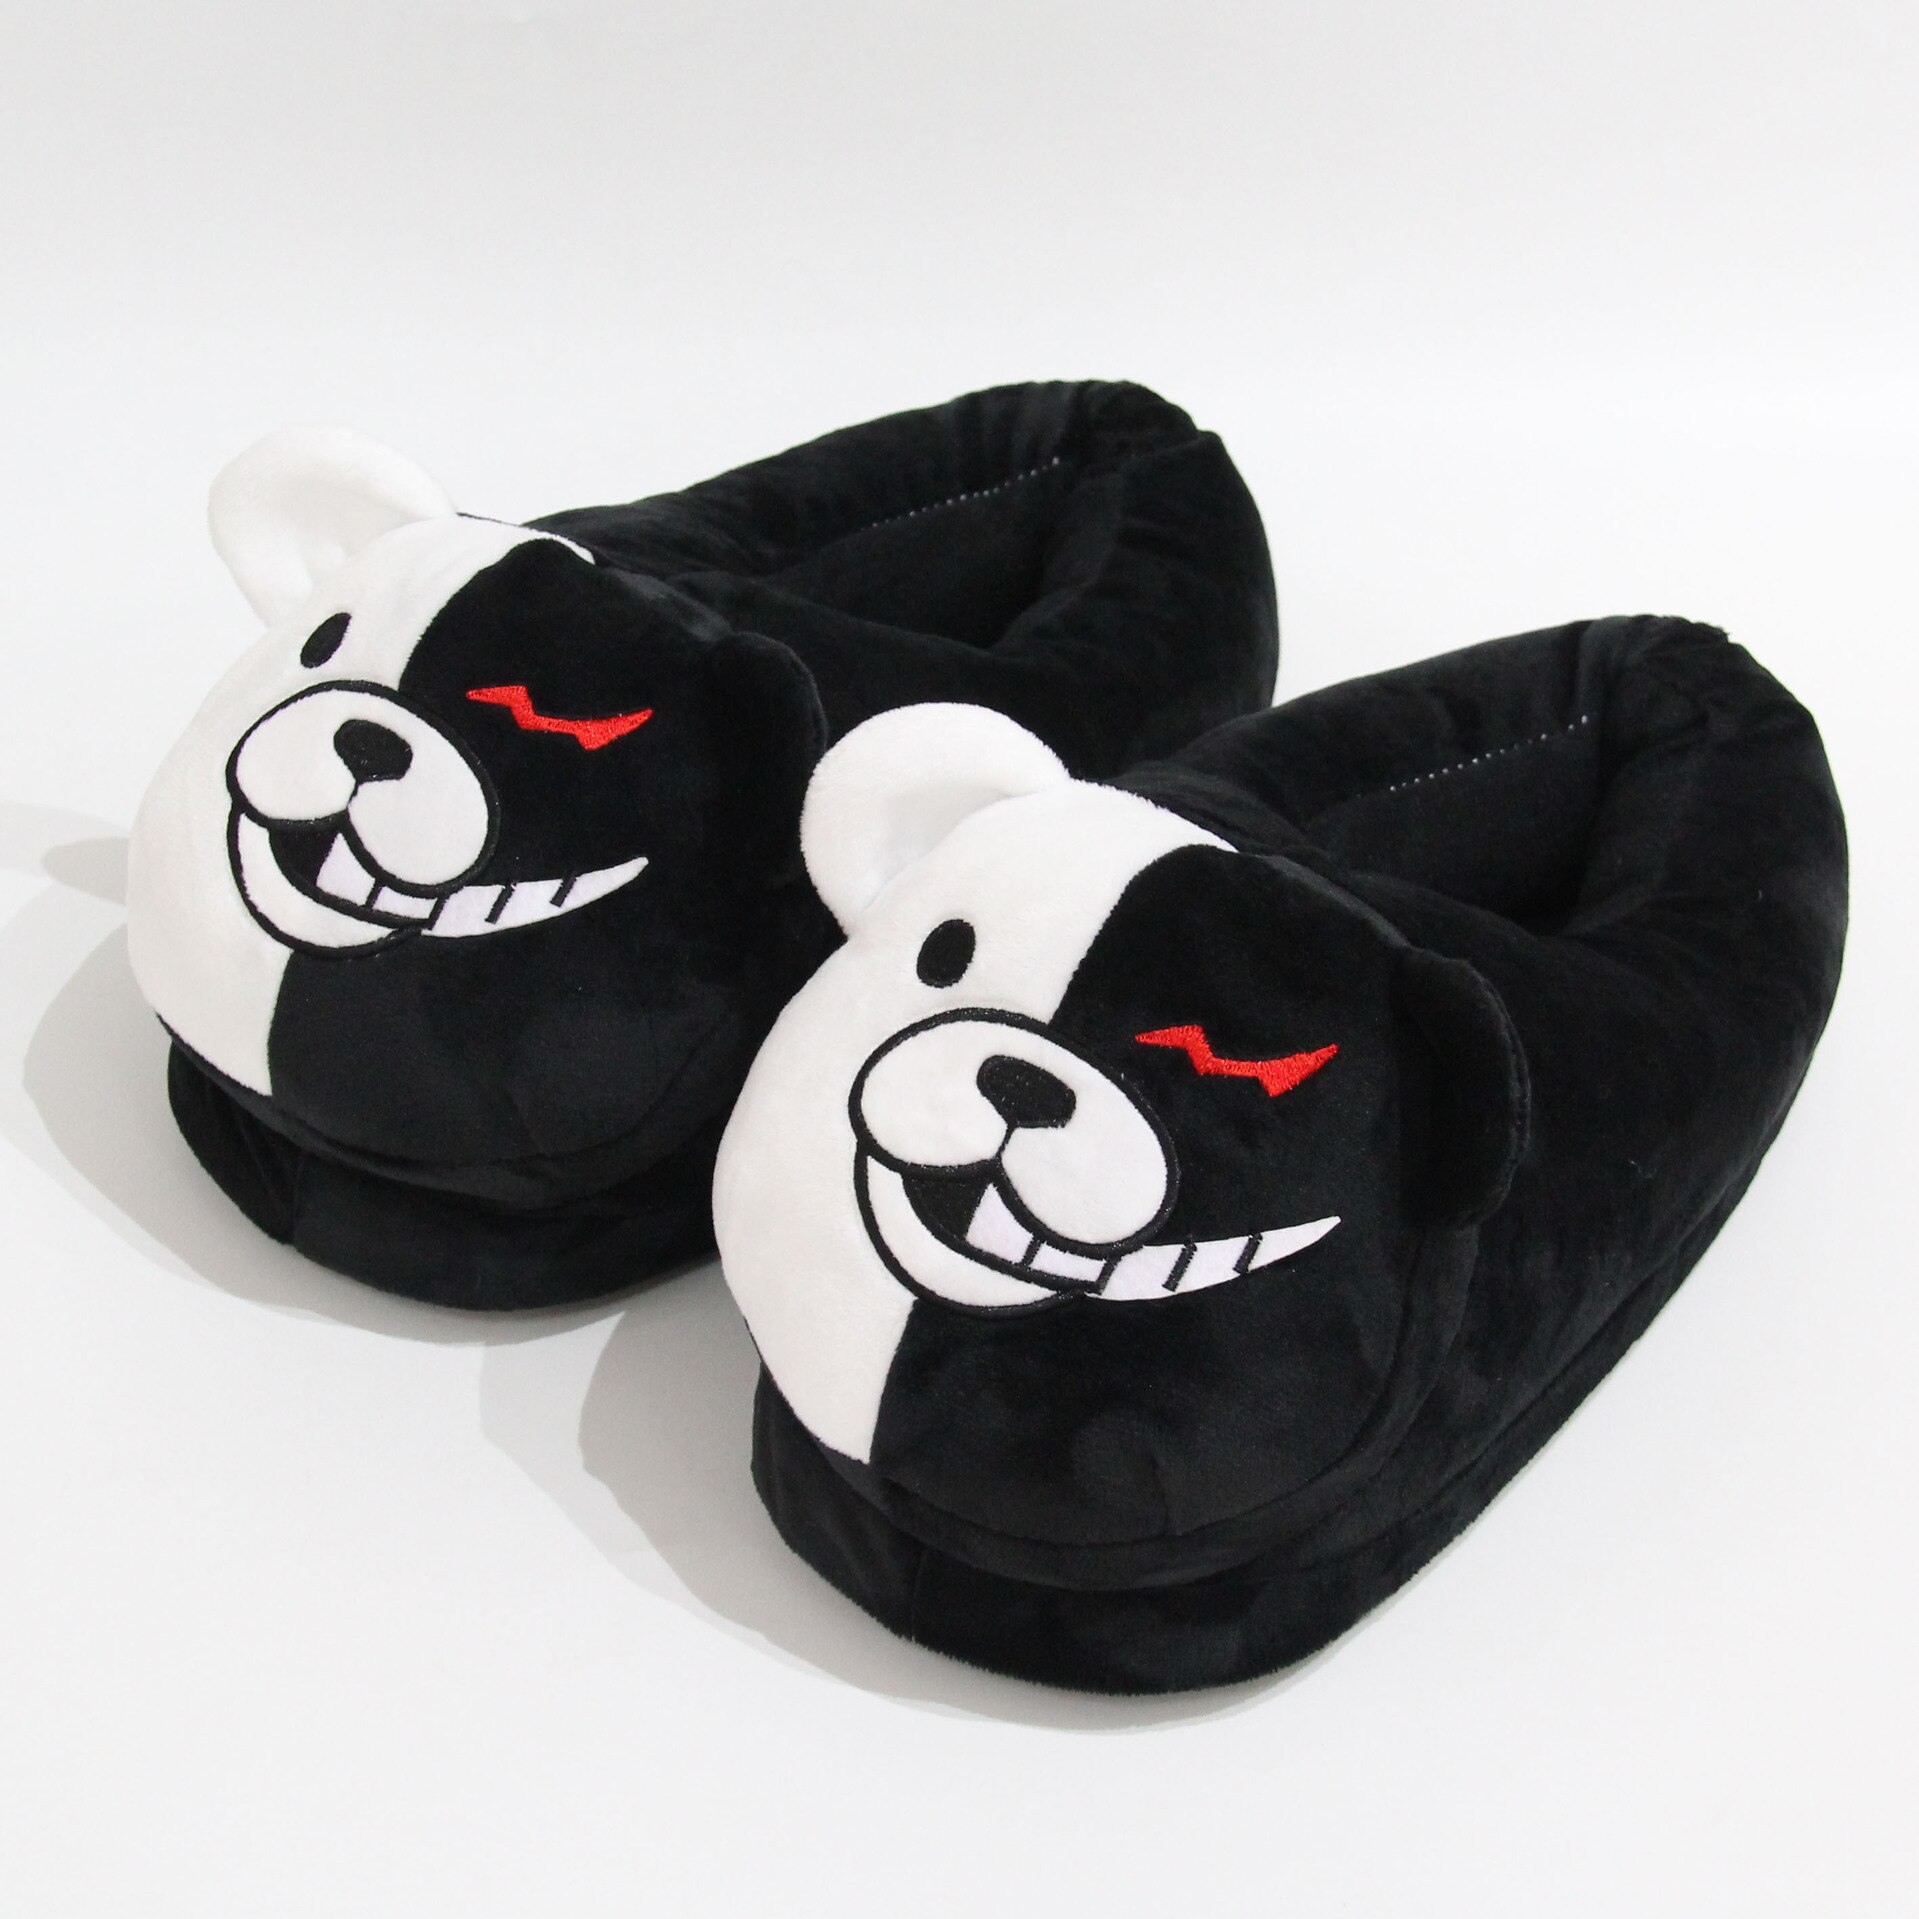 Women Winter Cotton Slippers Plush Anime Cosplay Cartoon Bear women's slippers Warm Indoor Cute Home House Family Slippers